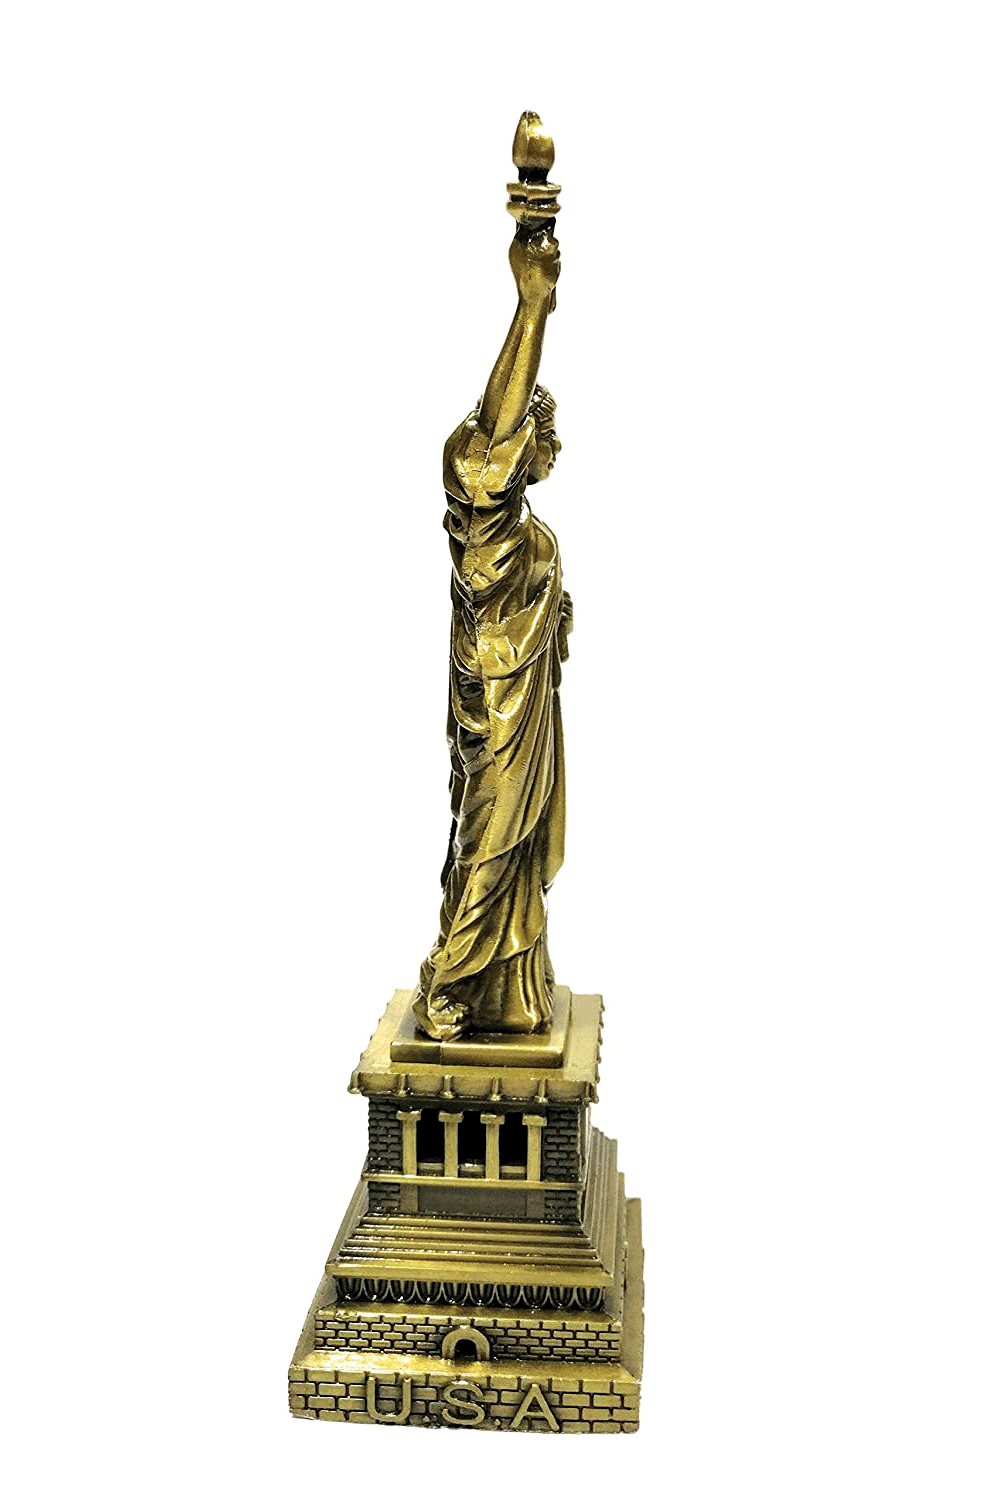 FunkyTradition 25 CM Tall Statue of Liberty New York City Showpiece for Home Office Decor and Anniversary Birthday Gifts